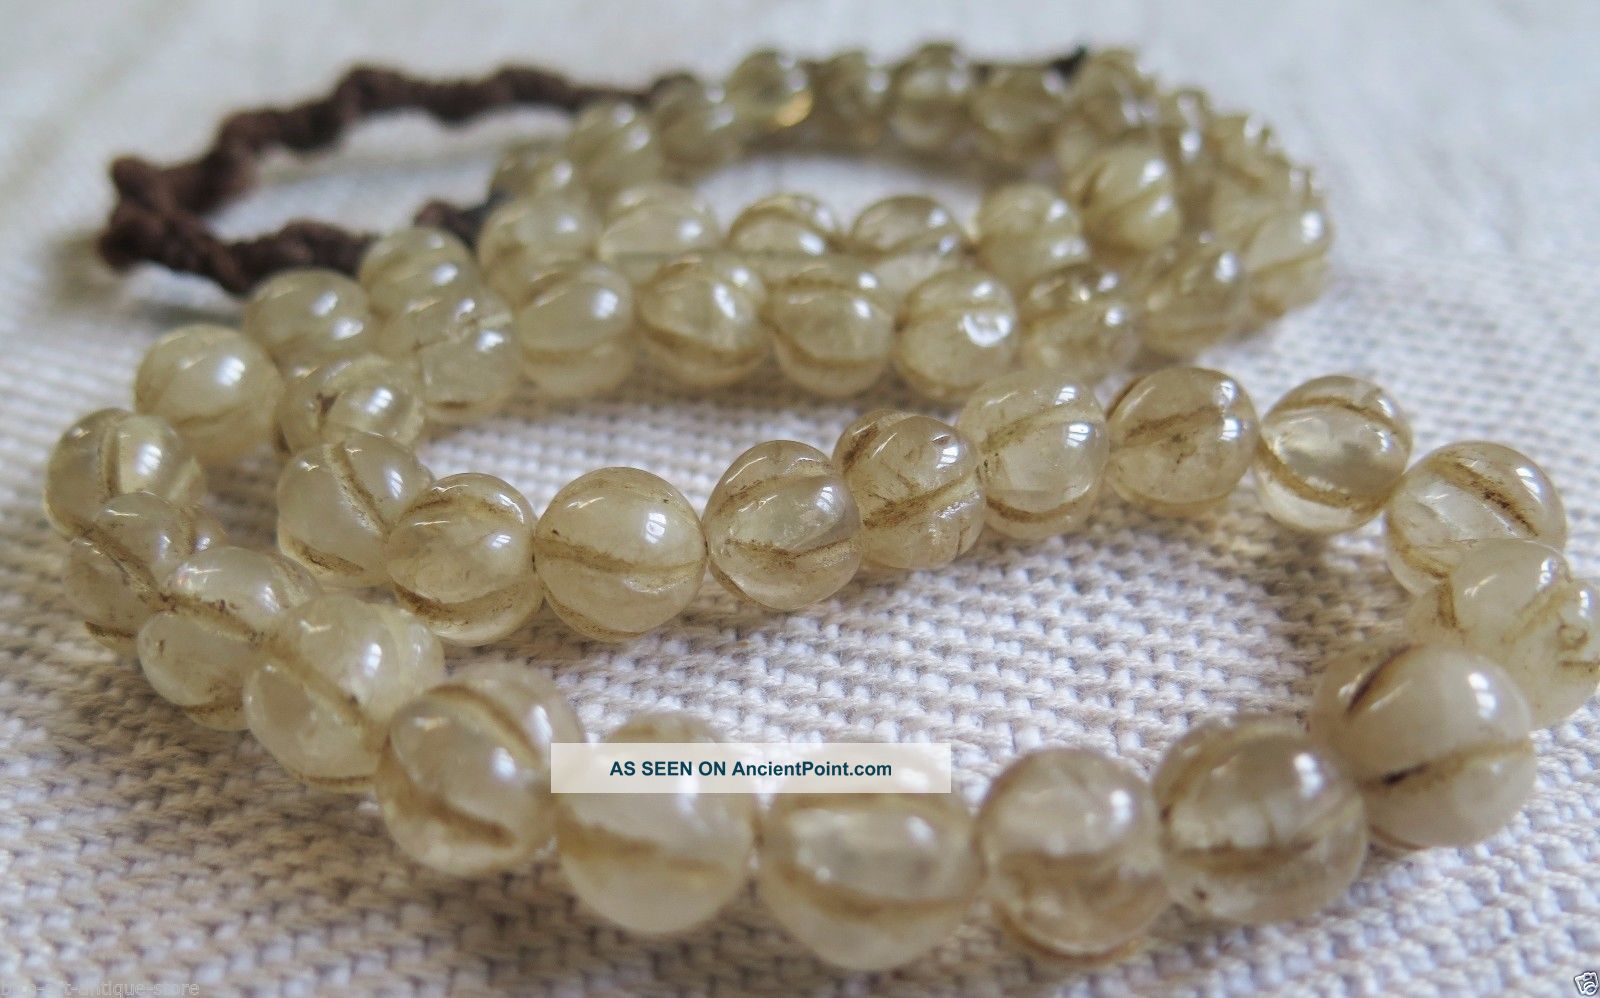 50 Rare Old Crystal Rock Quartz Carved Melon Himalaya Beads Handmade Necklace 2 Other Antiquities photo